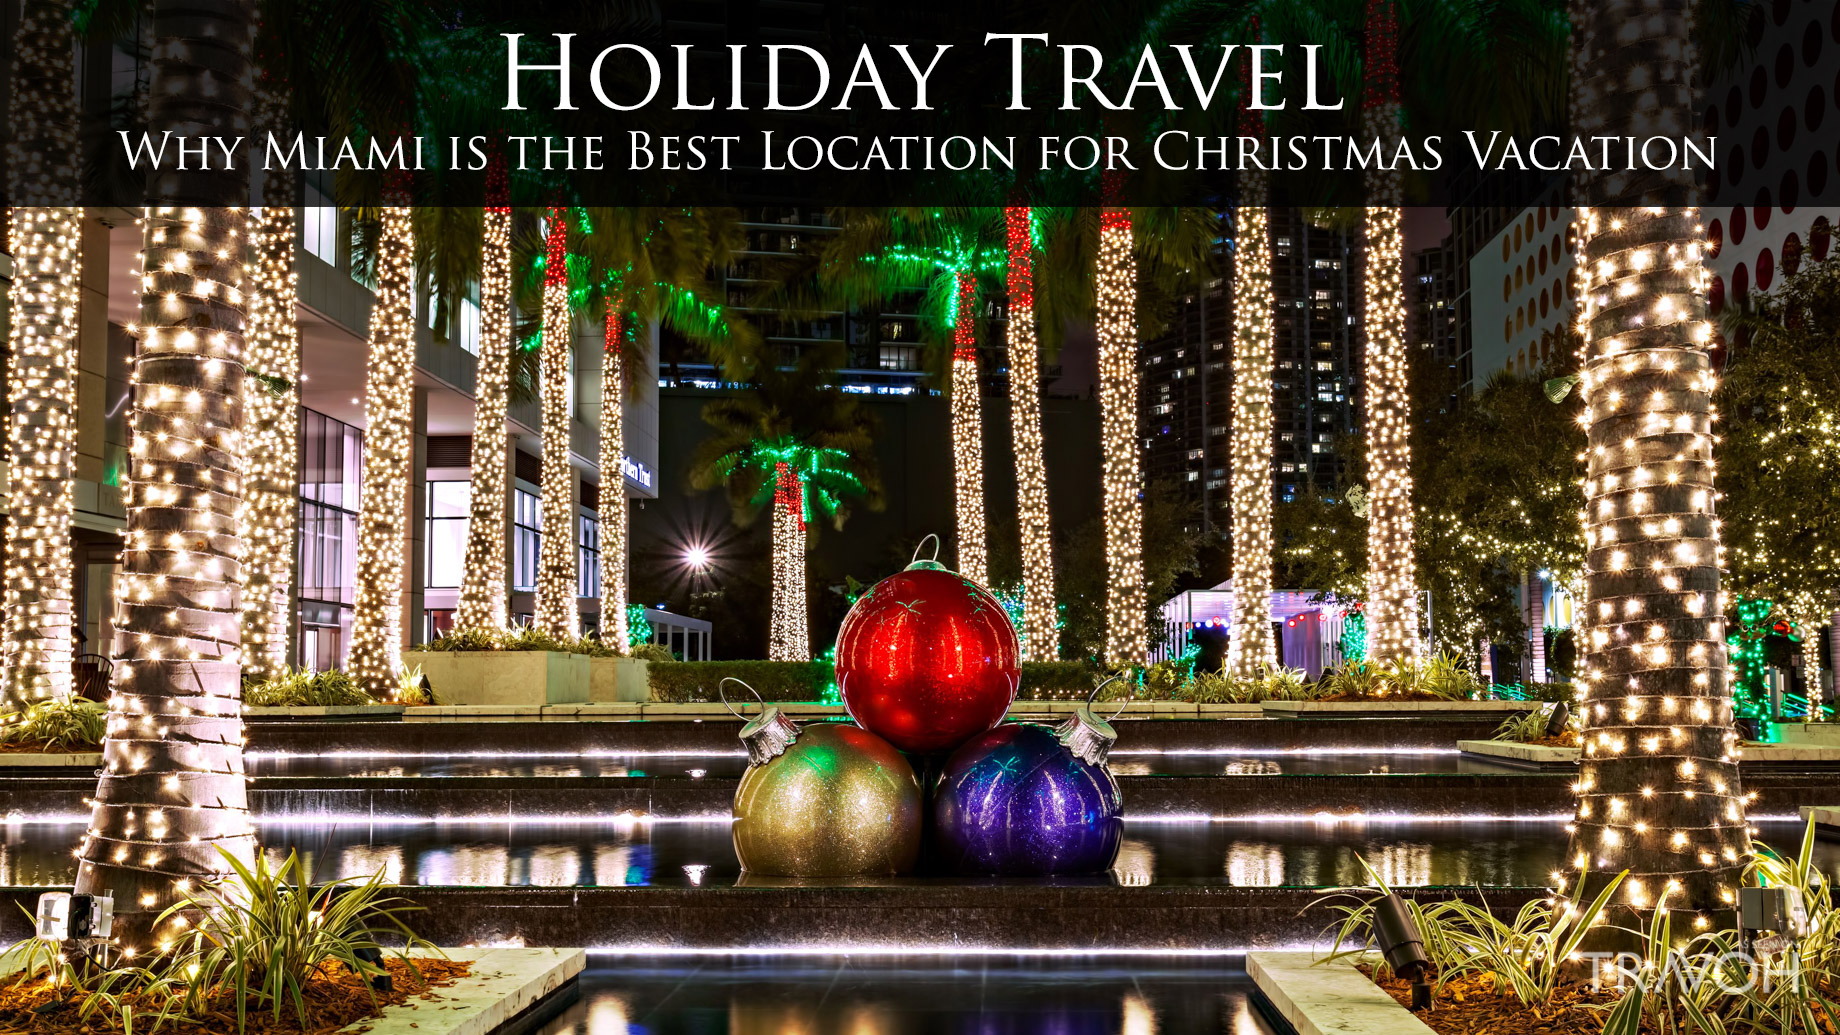 Holiday Travel - Why Miami is the Best Location for Christmas Vacation